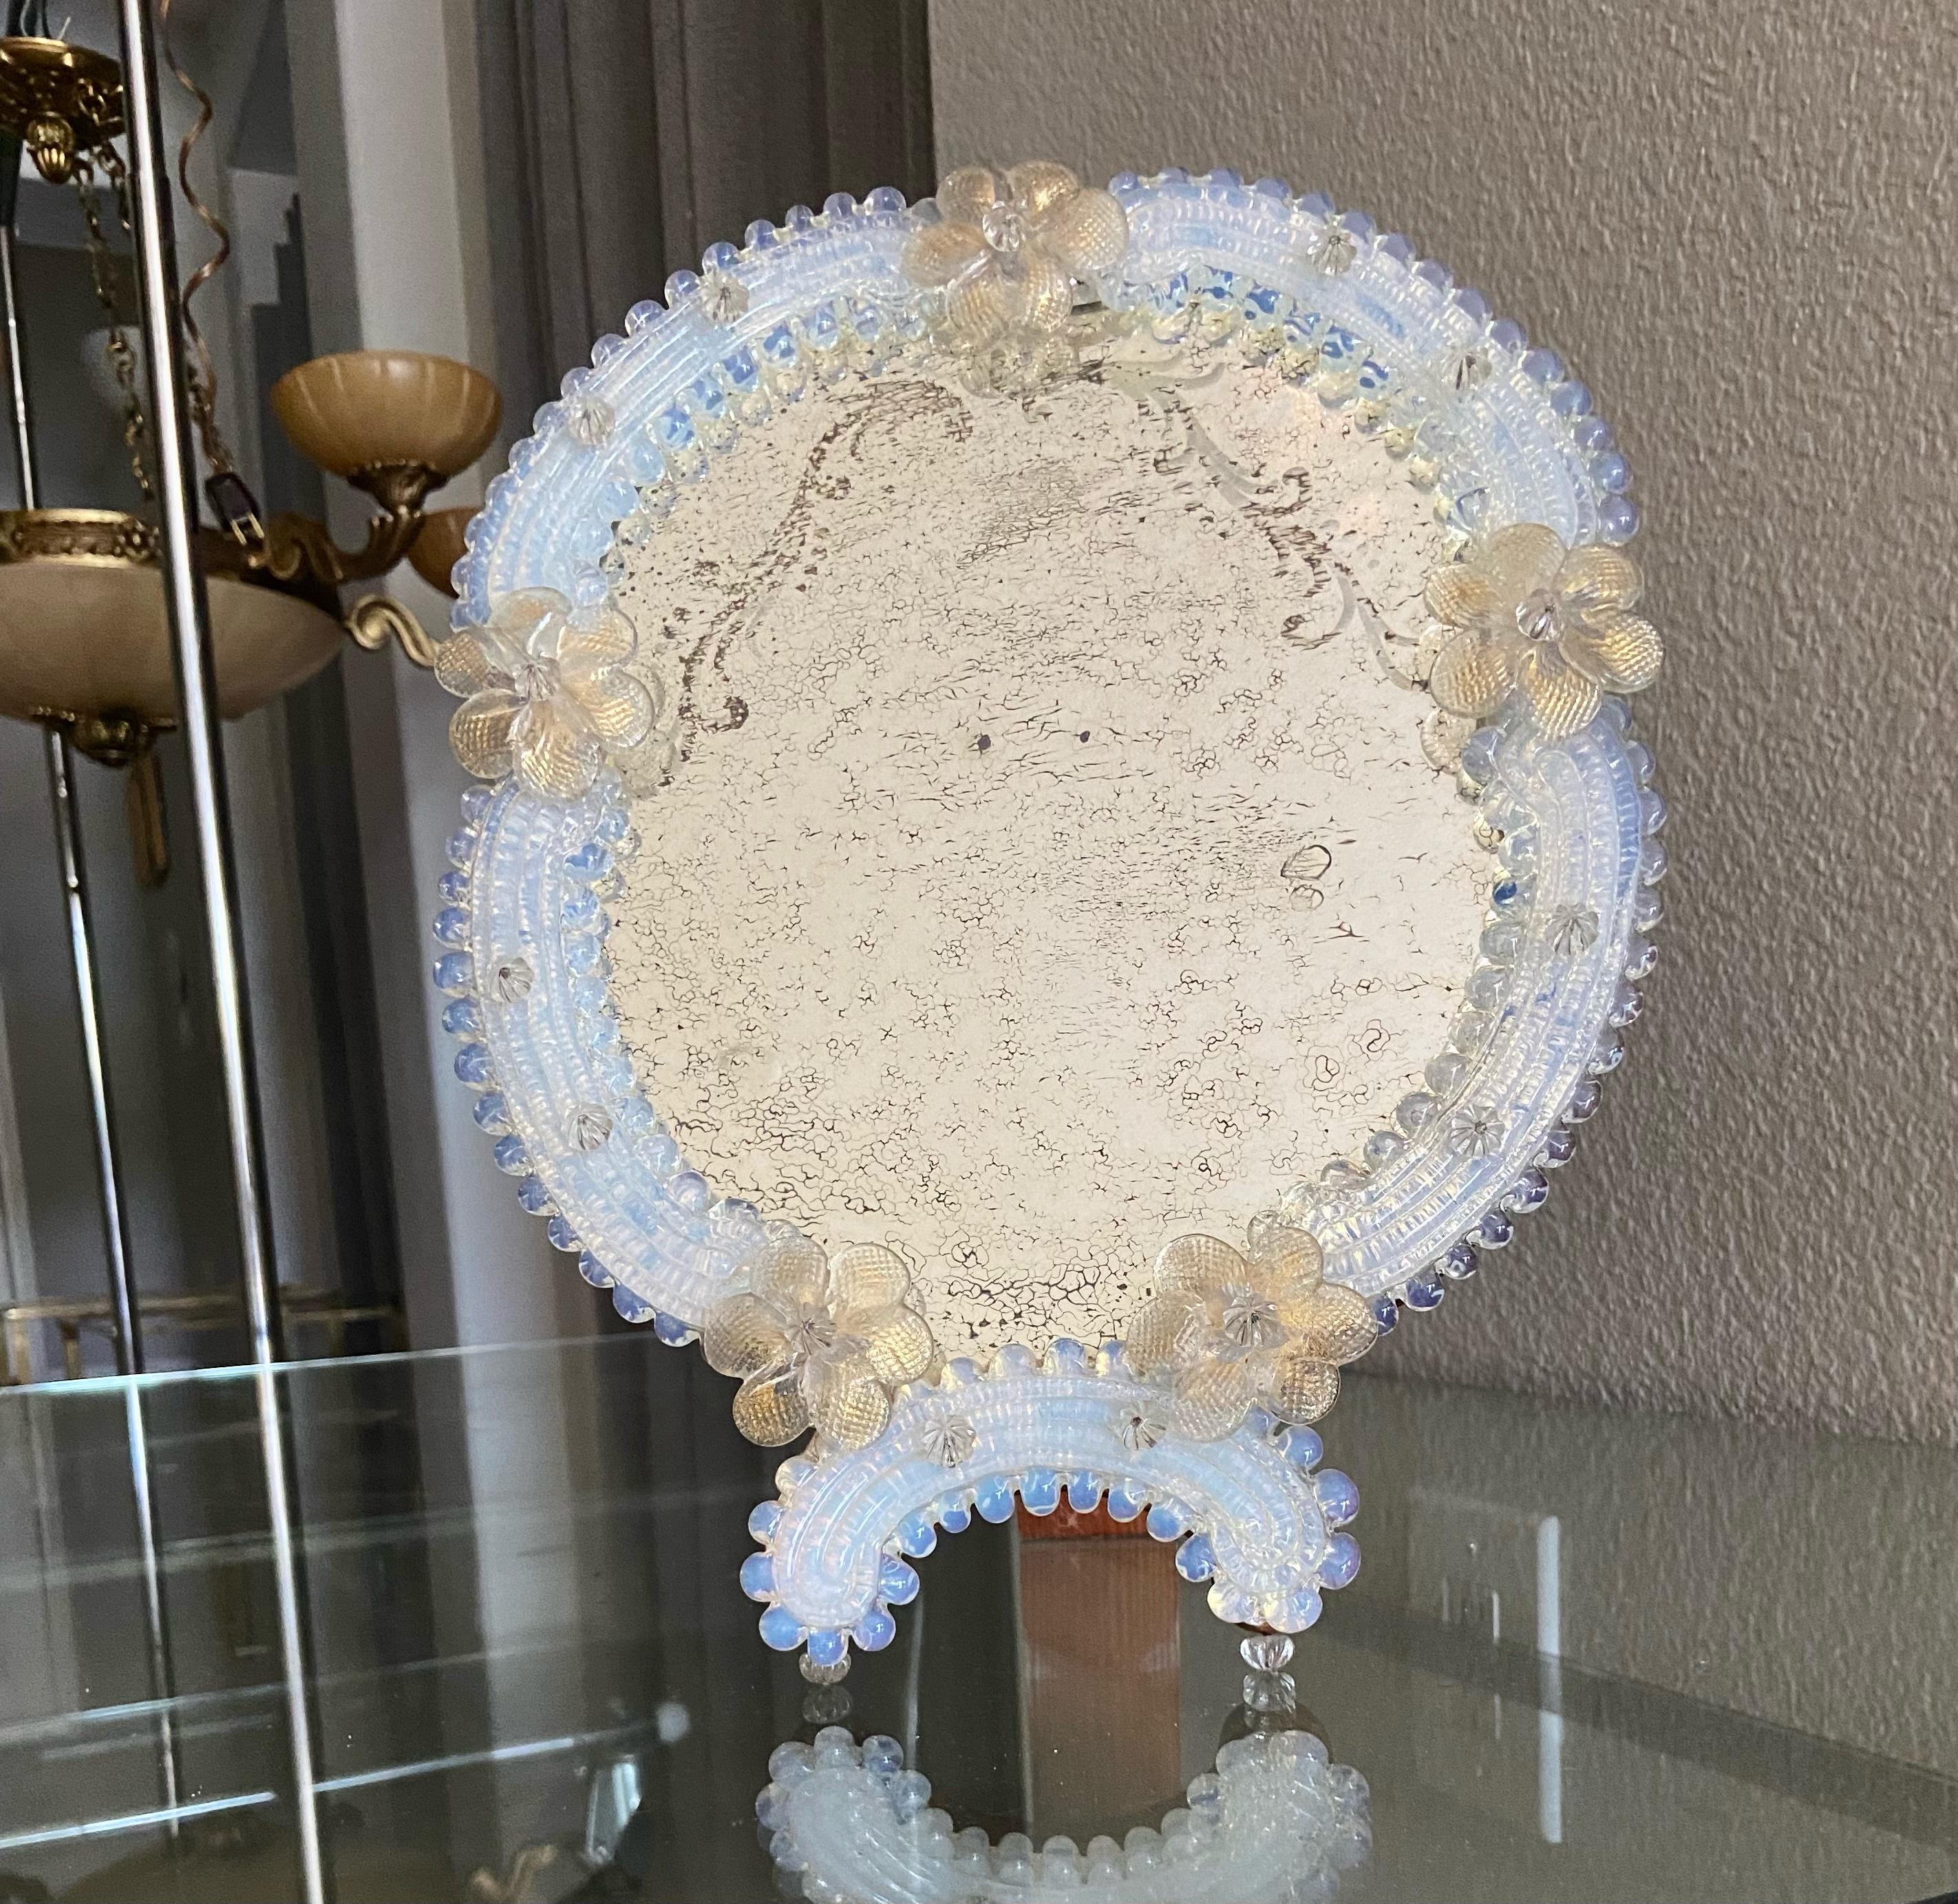 Murano vanity table mirror with clear and gold flowers, and opalescence color glass pieces surrounding the mirror. Mirror glass has decorative etching and antiqued finish. The stand and backing are wood. 
  